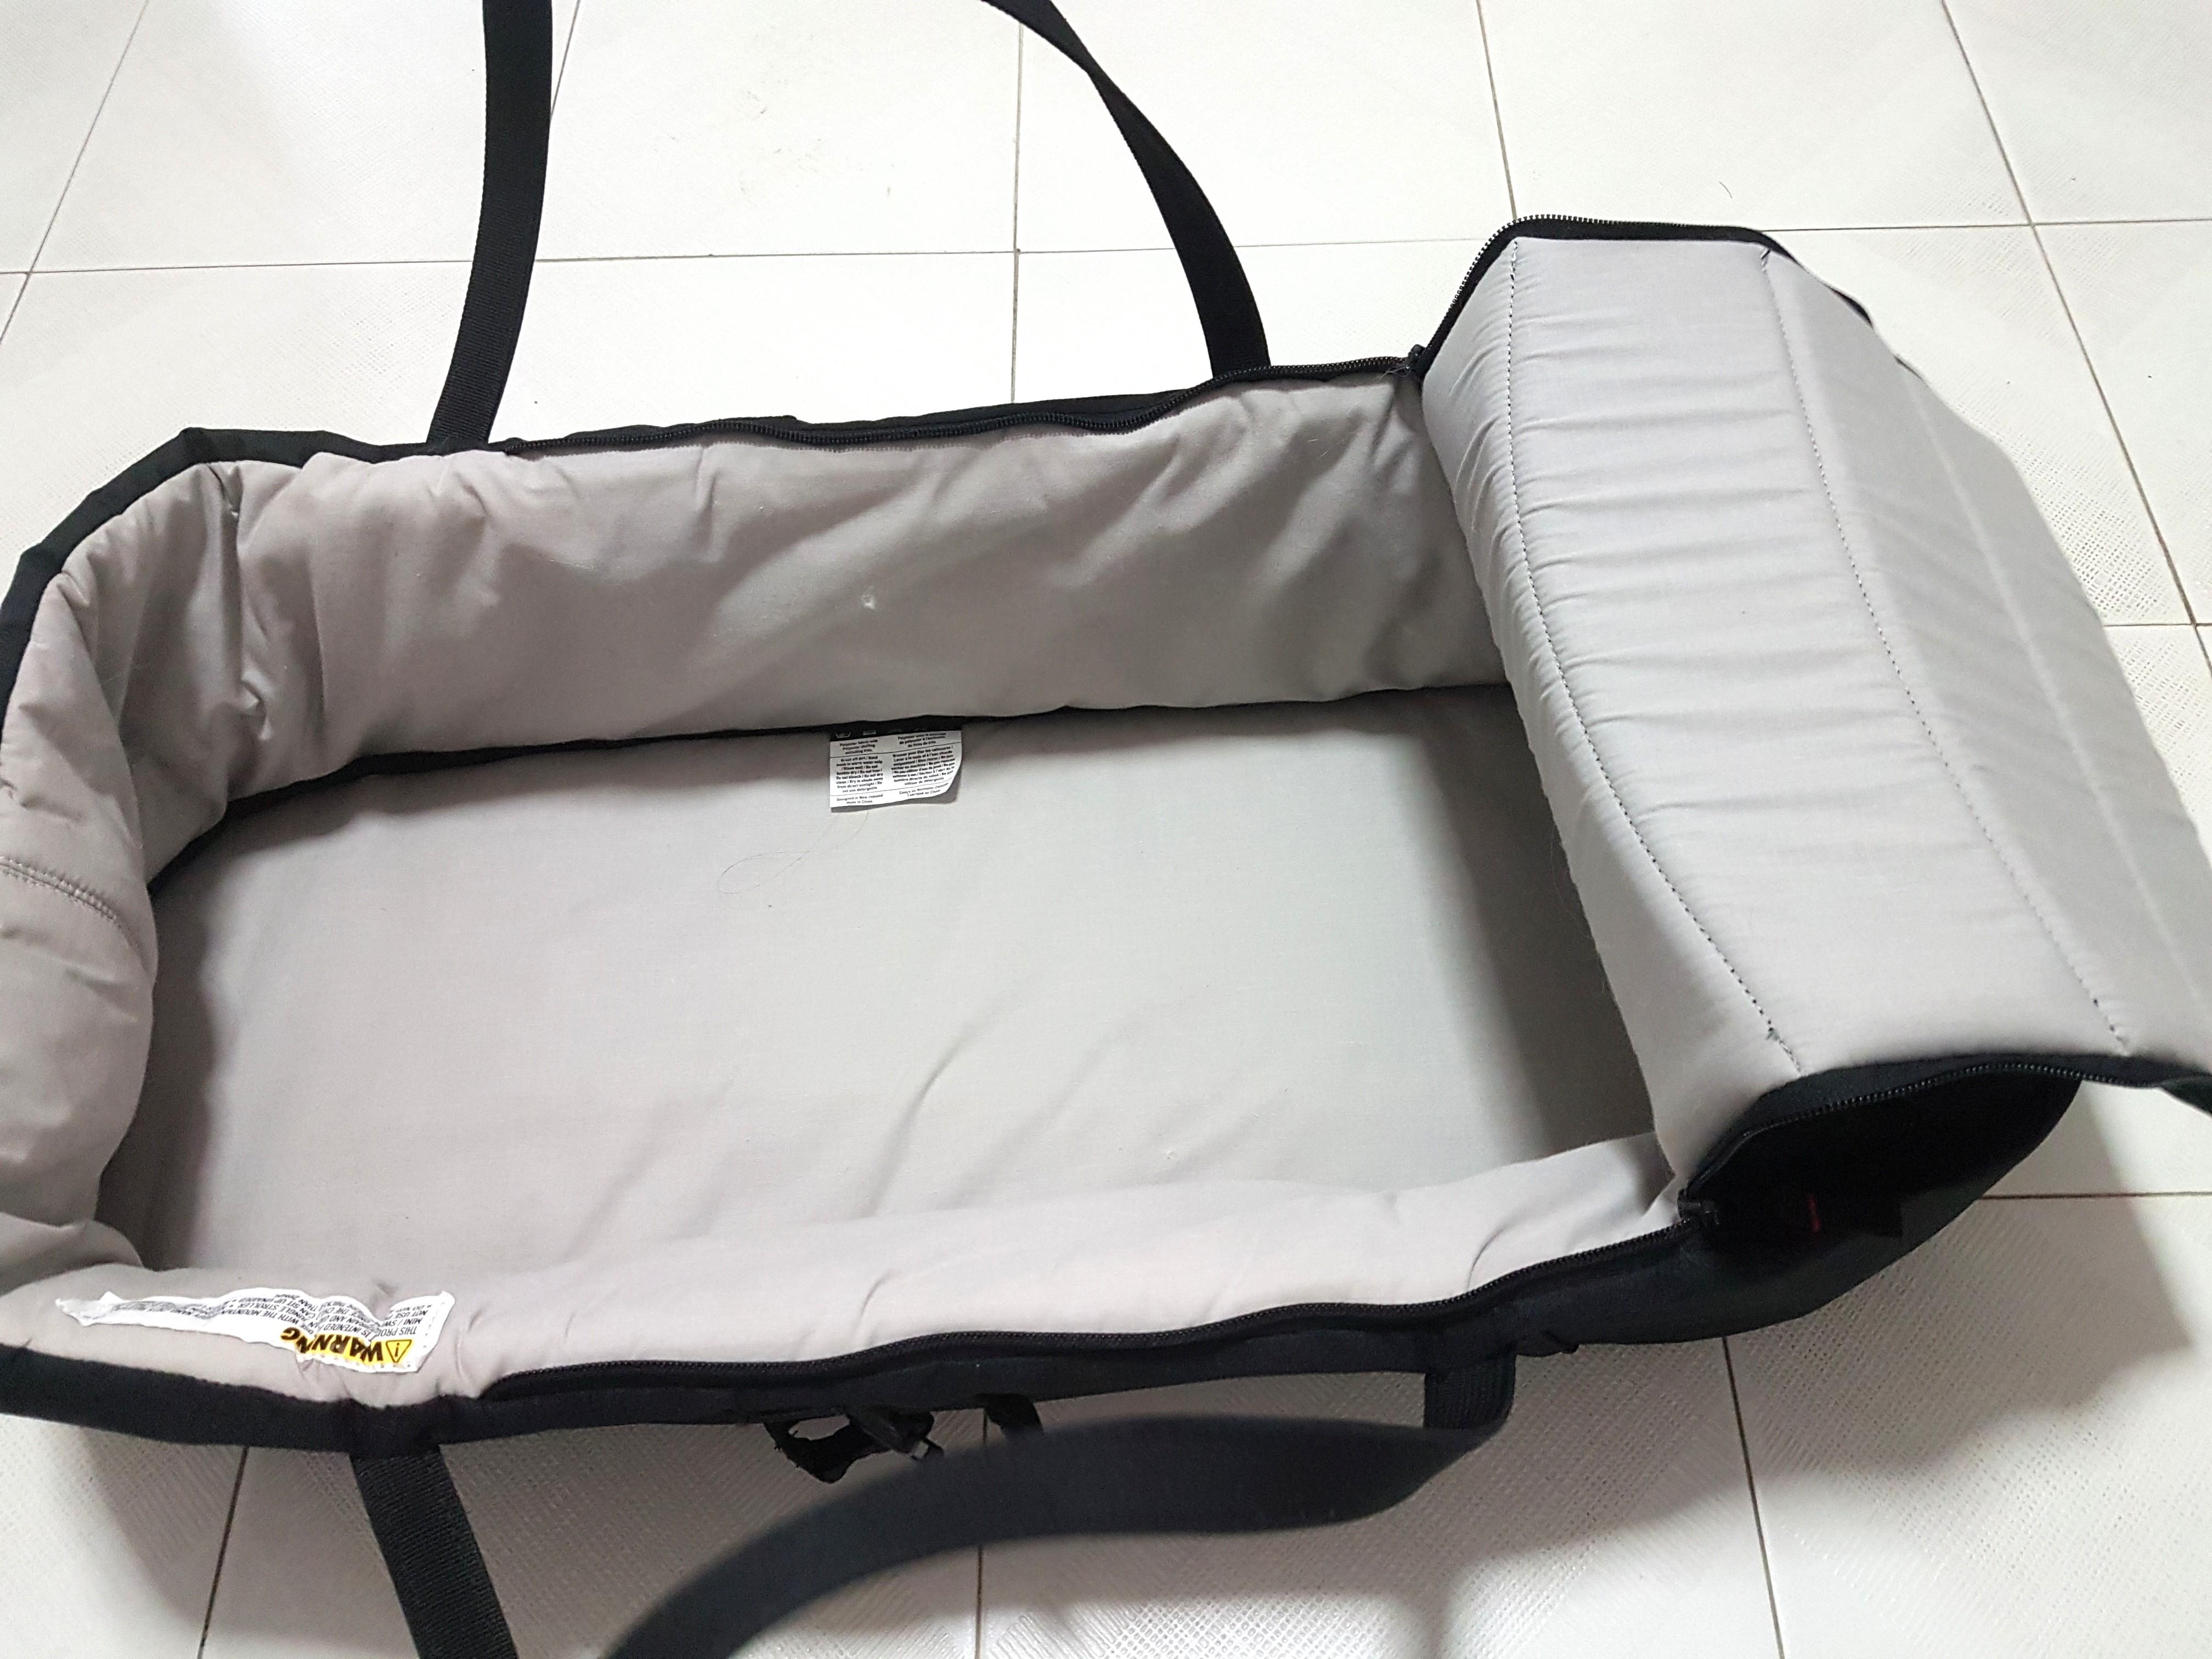 mountain buggy cocoon vs carrycot